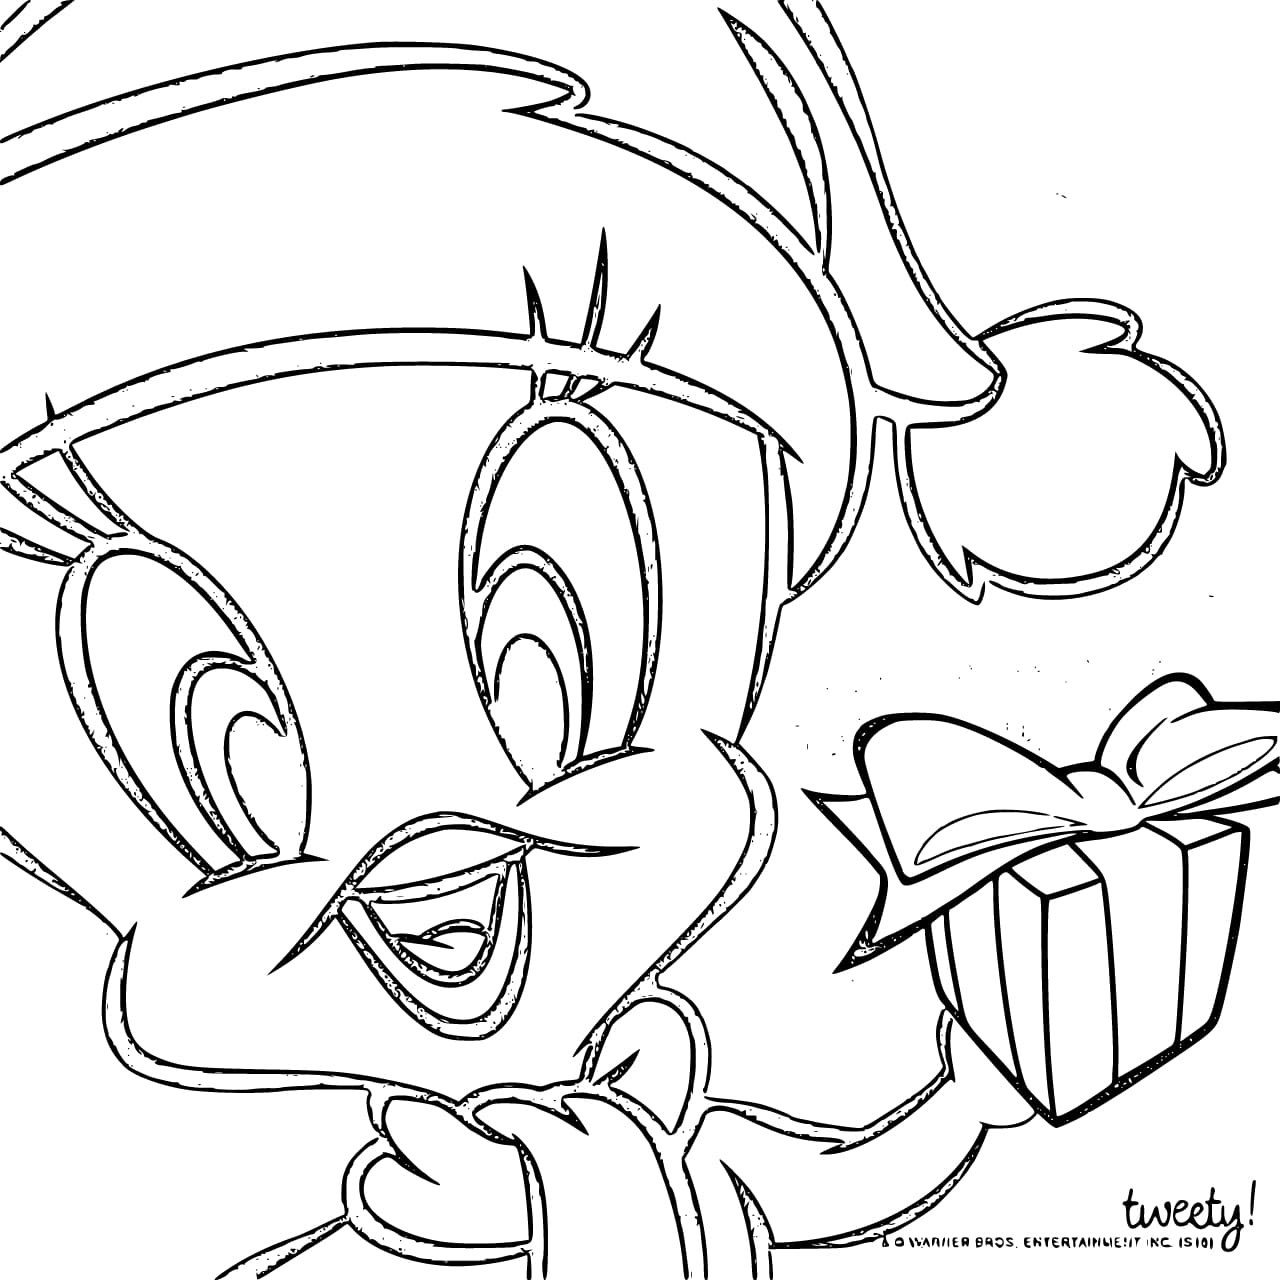 Tweety Coloring Pages | 50 Printable Coloring Pages